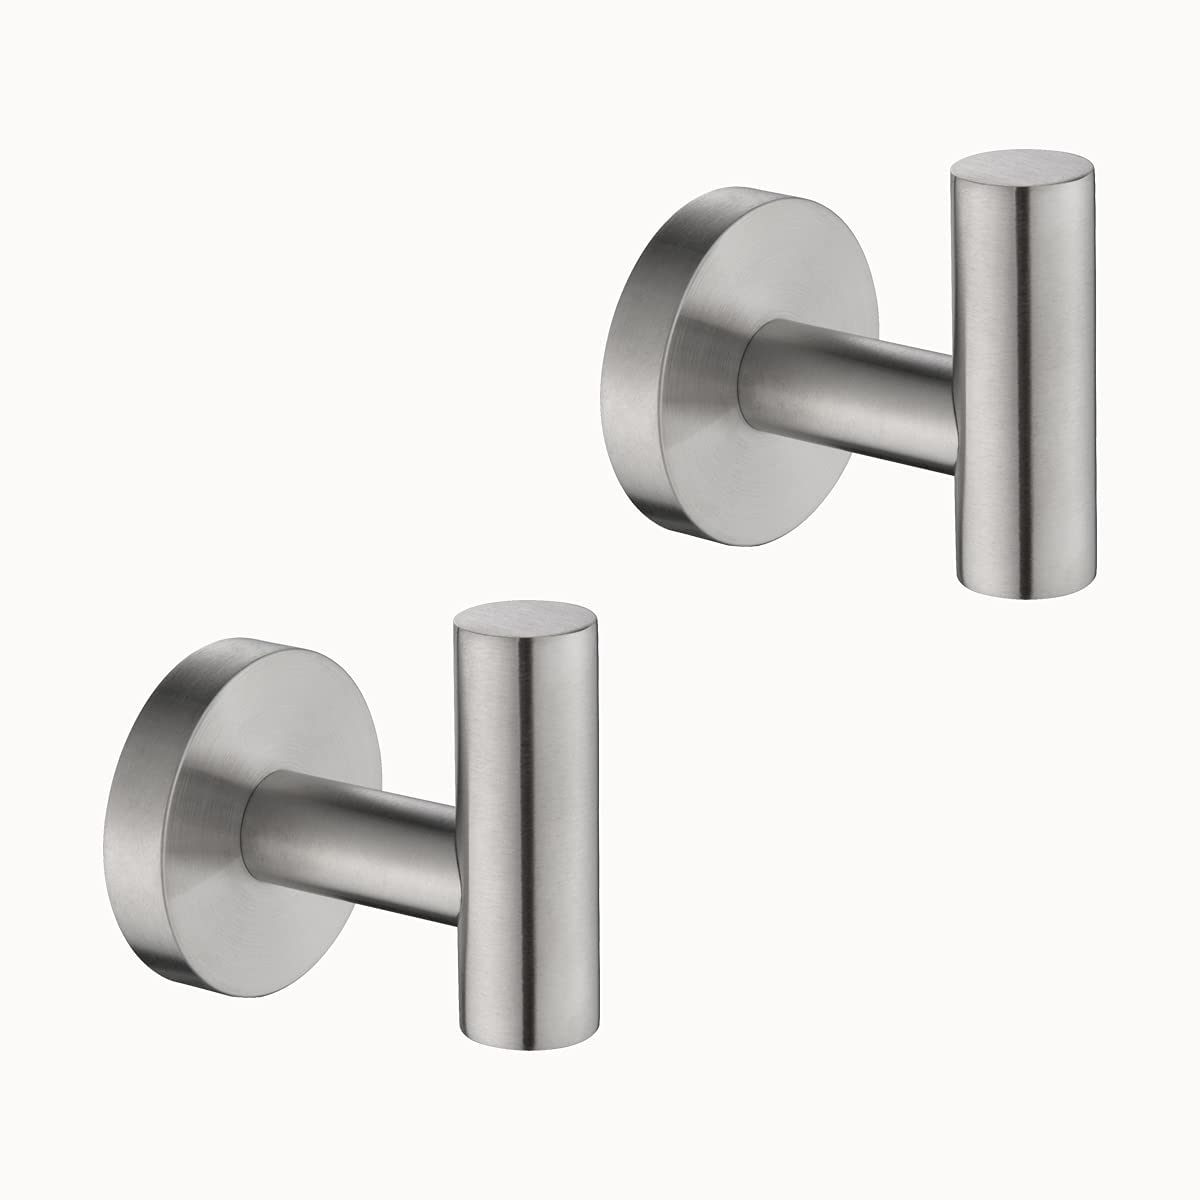 2 Pack Bath Towel Hooks Wall Mounted Robe Hook for Bathroom Kitchen SUS304 Stainless Steel Coat Clothes Hooks Rustproof - WELQUEEN